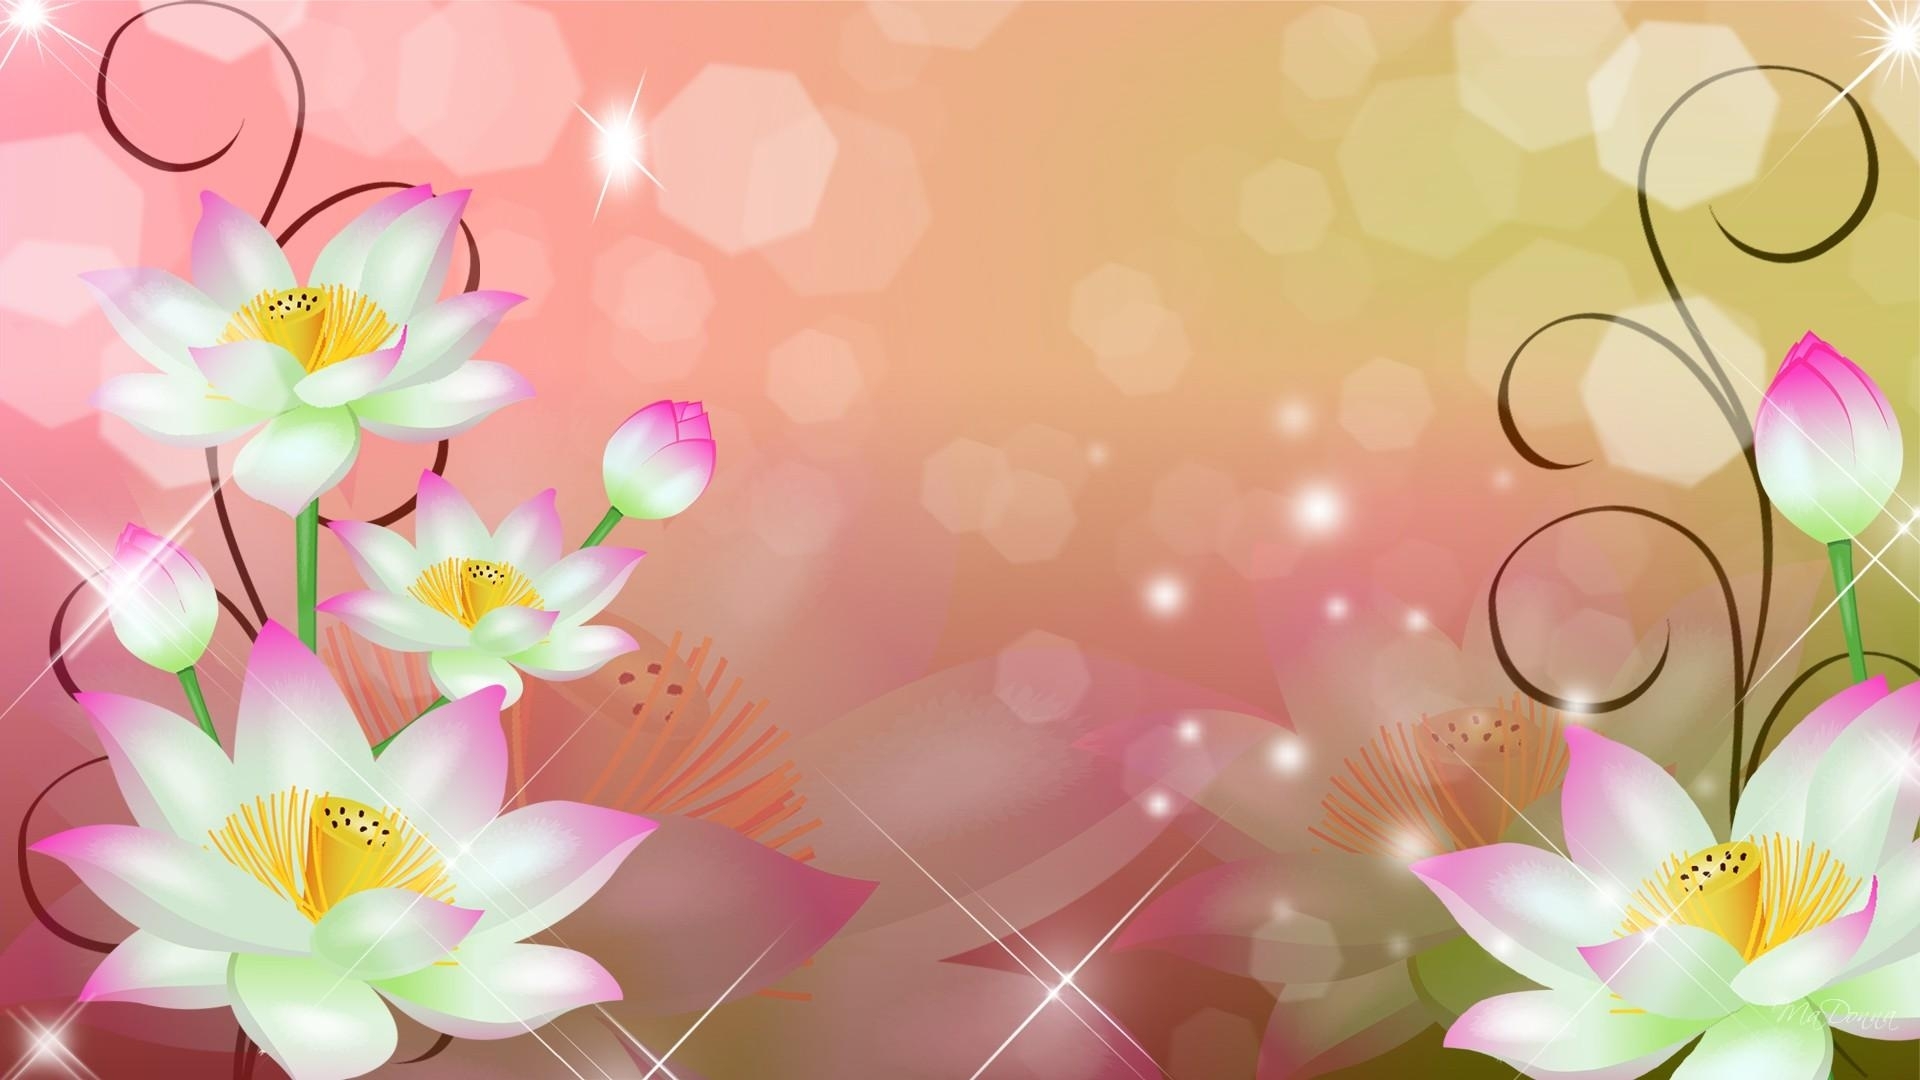 background flower image Group with 74 items